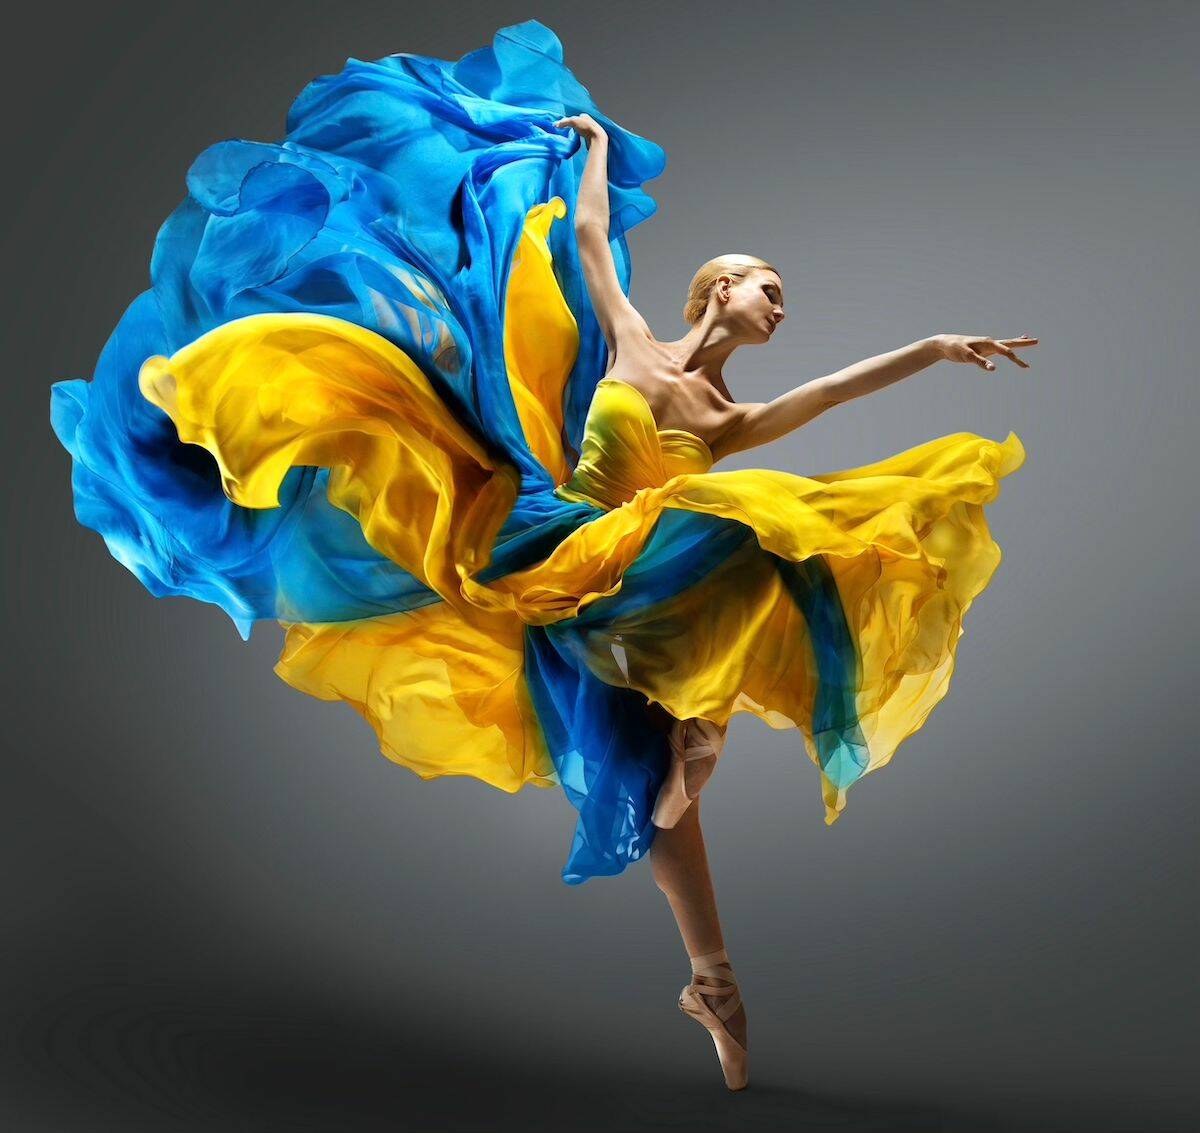 Colours of the Ukrainian flag are worn by a dancer with the National Ballet of Ukraine, to perform at a Vancouver theatre in February 2024 on a tour of Canada. (Contributed photo)